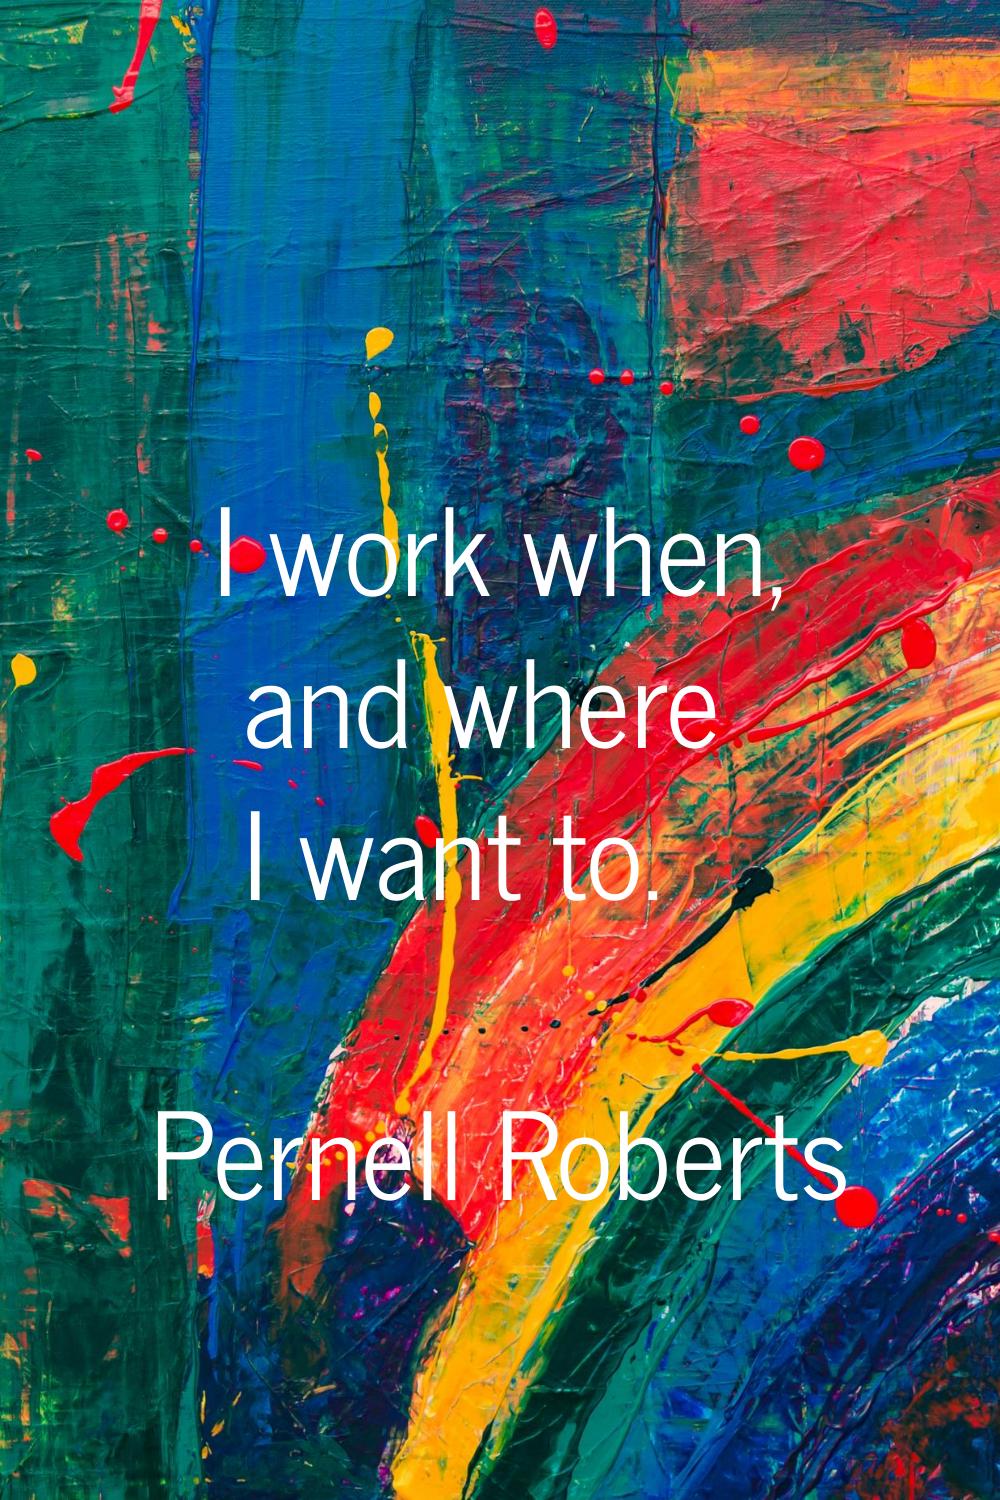 I work when, and where I want to.